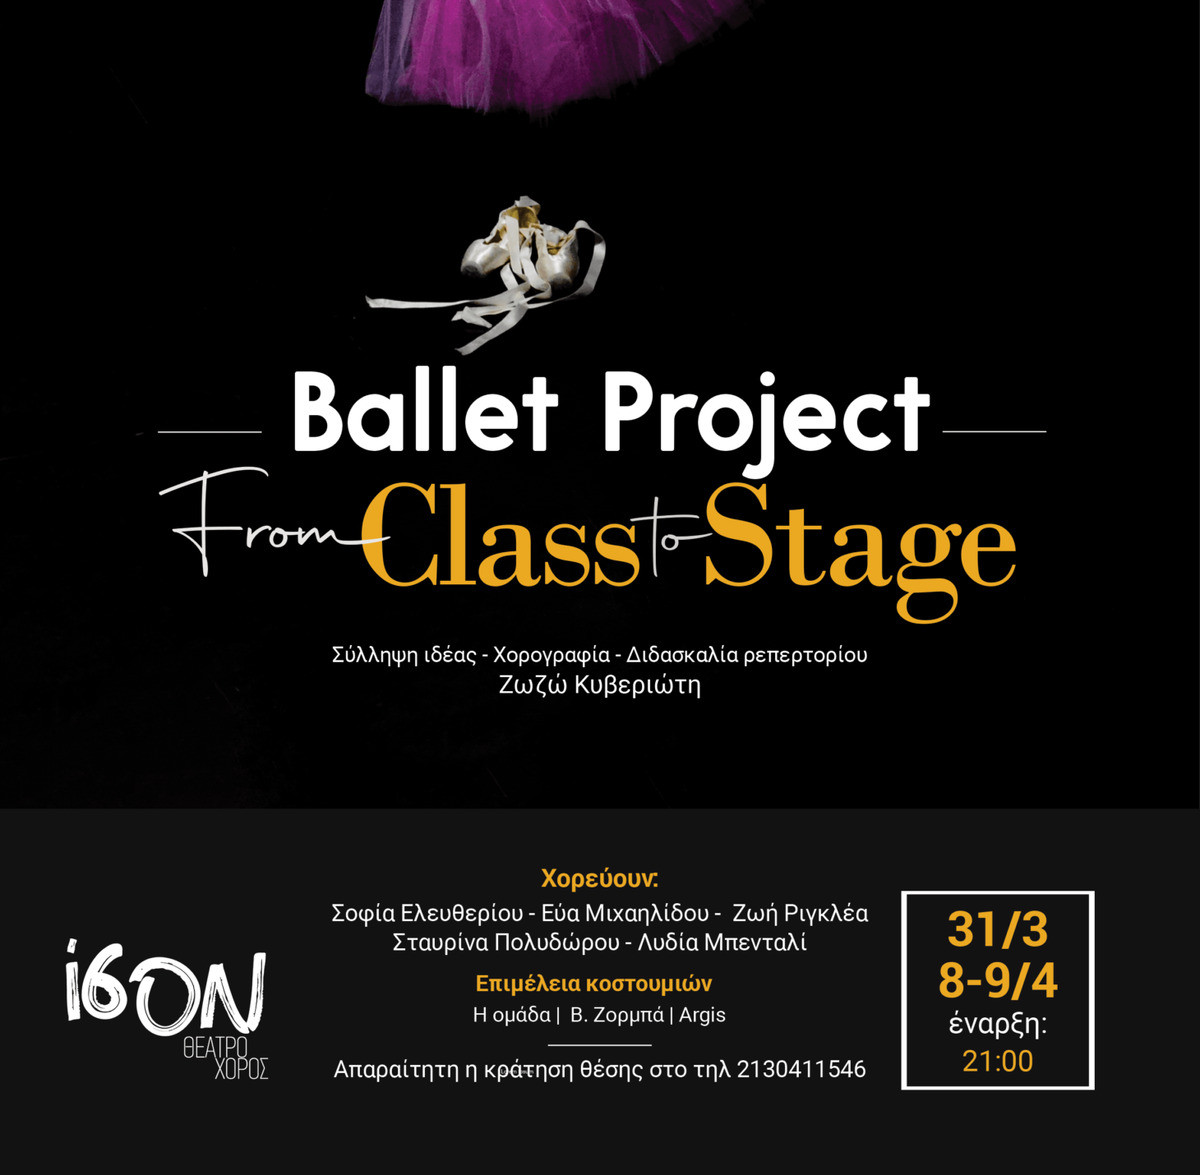 «Ballet Project: From Class to Stage»: Μία παράσταση για την ζωή των χορευτριών κλασικού μπαλέτου